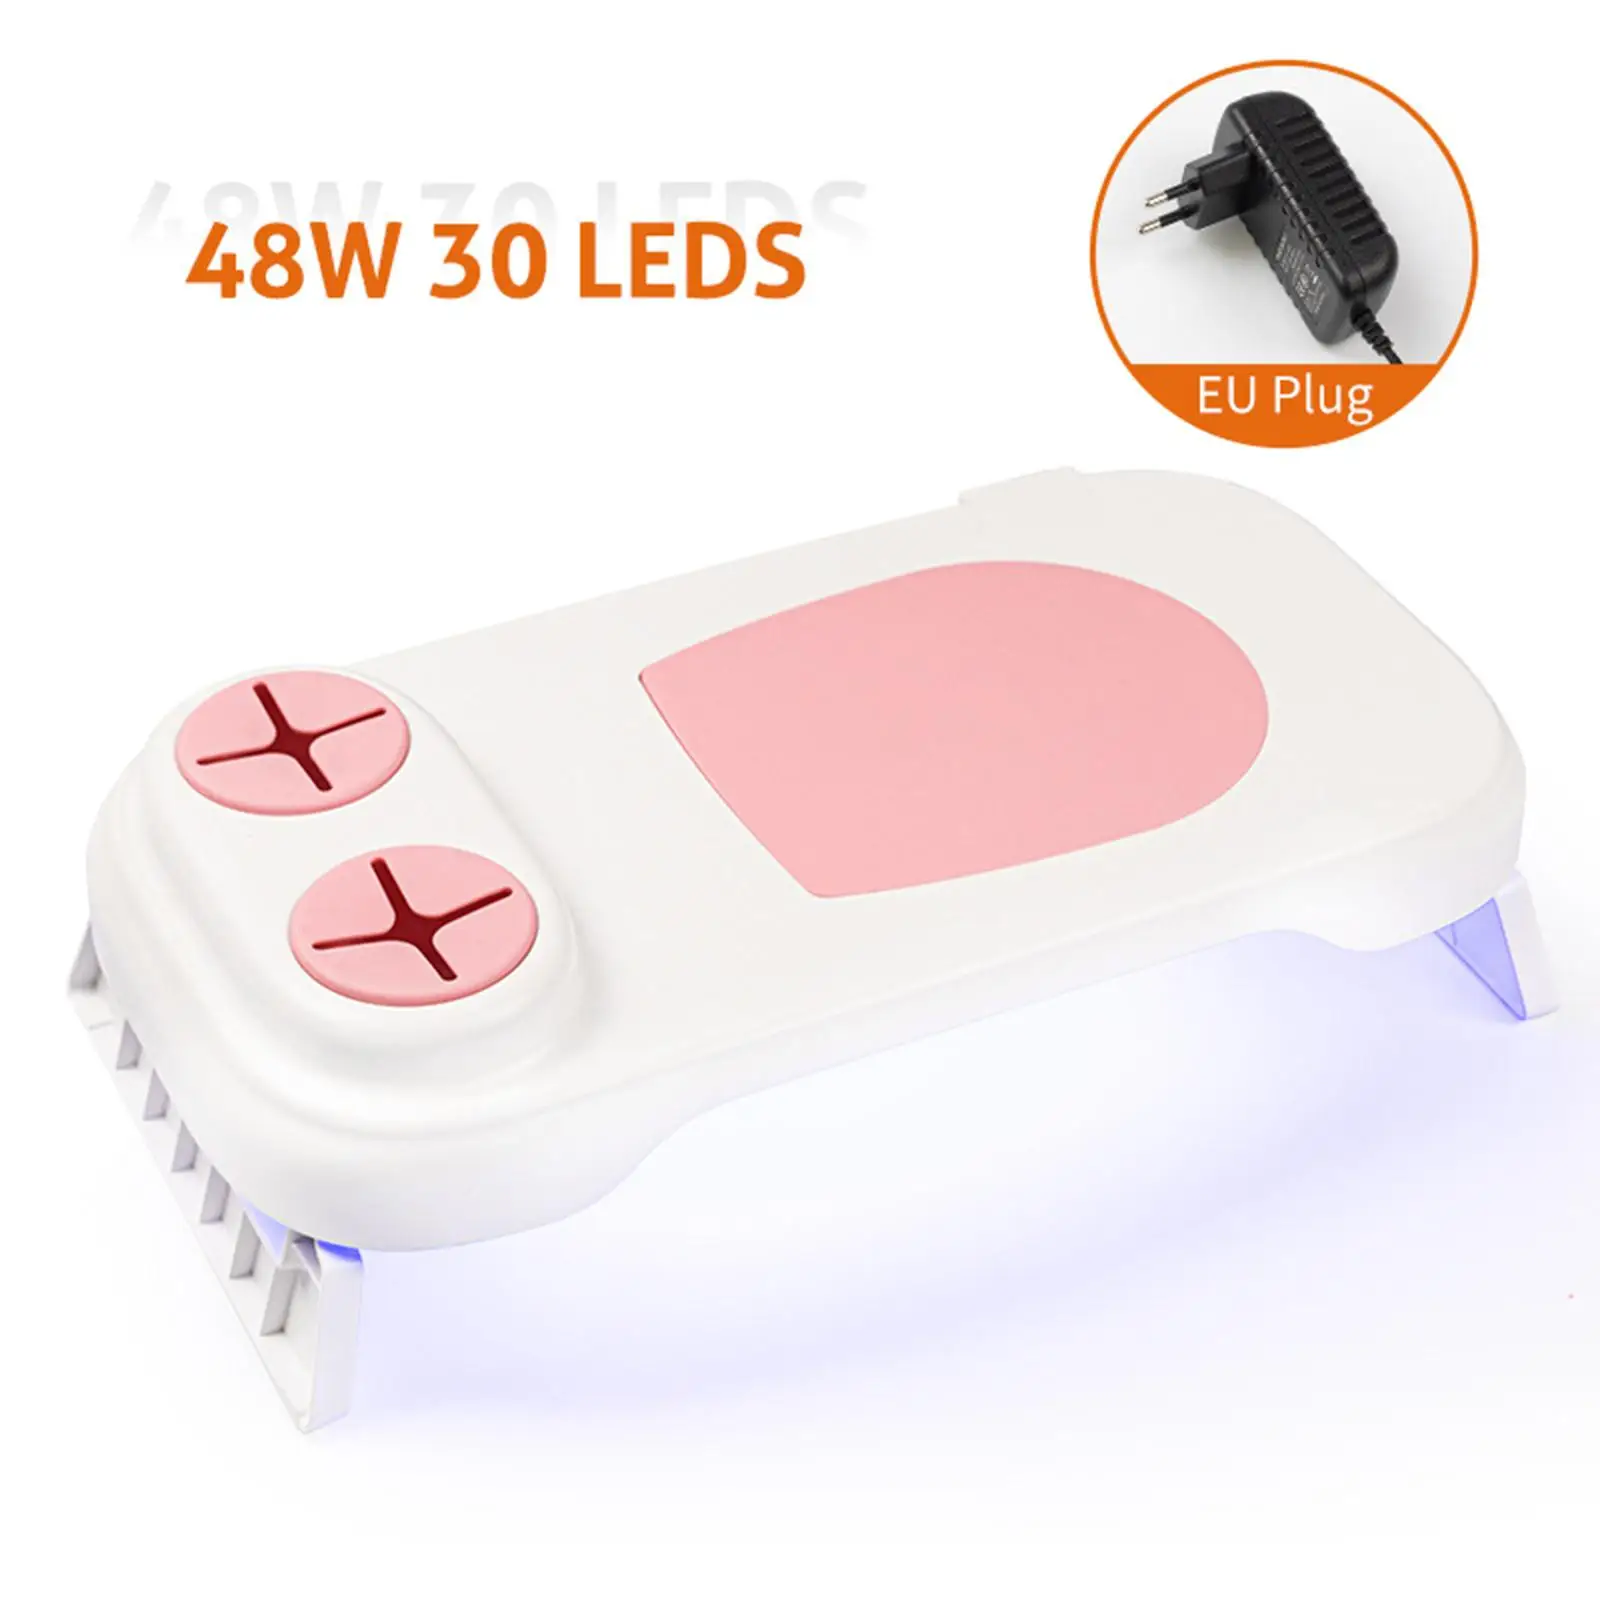 Gel Nail Polish Lamp LED Lamp Professional Curing Light Manicure Lamp Interface Fast Drying Manicure Dryer for Salon